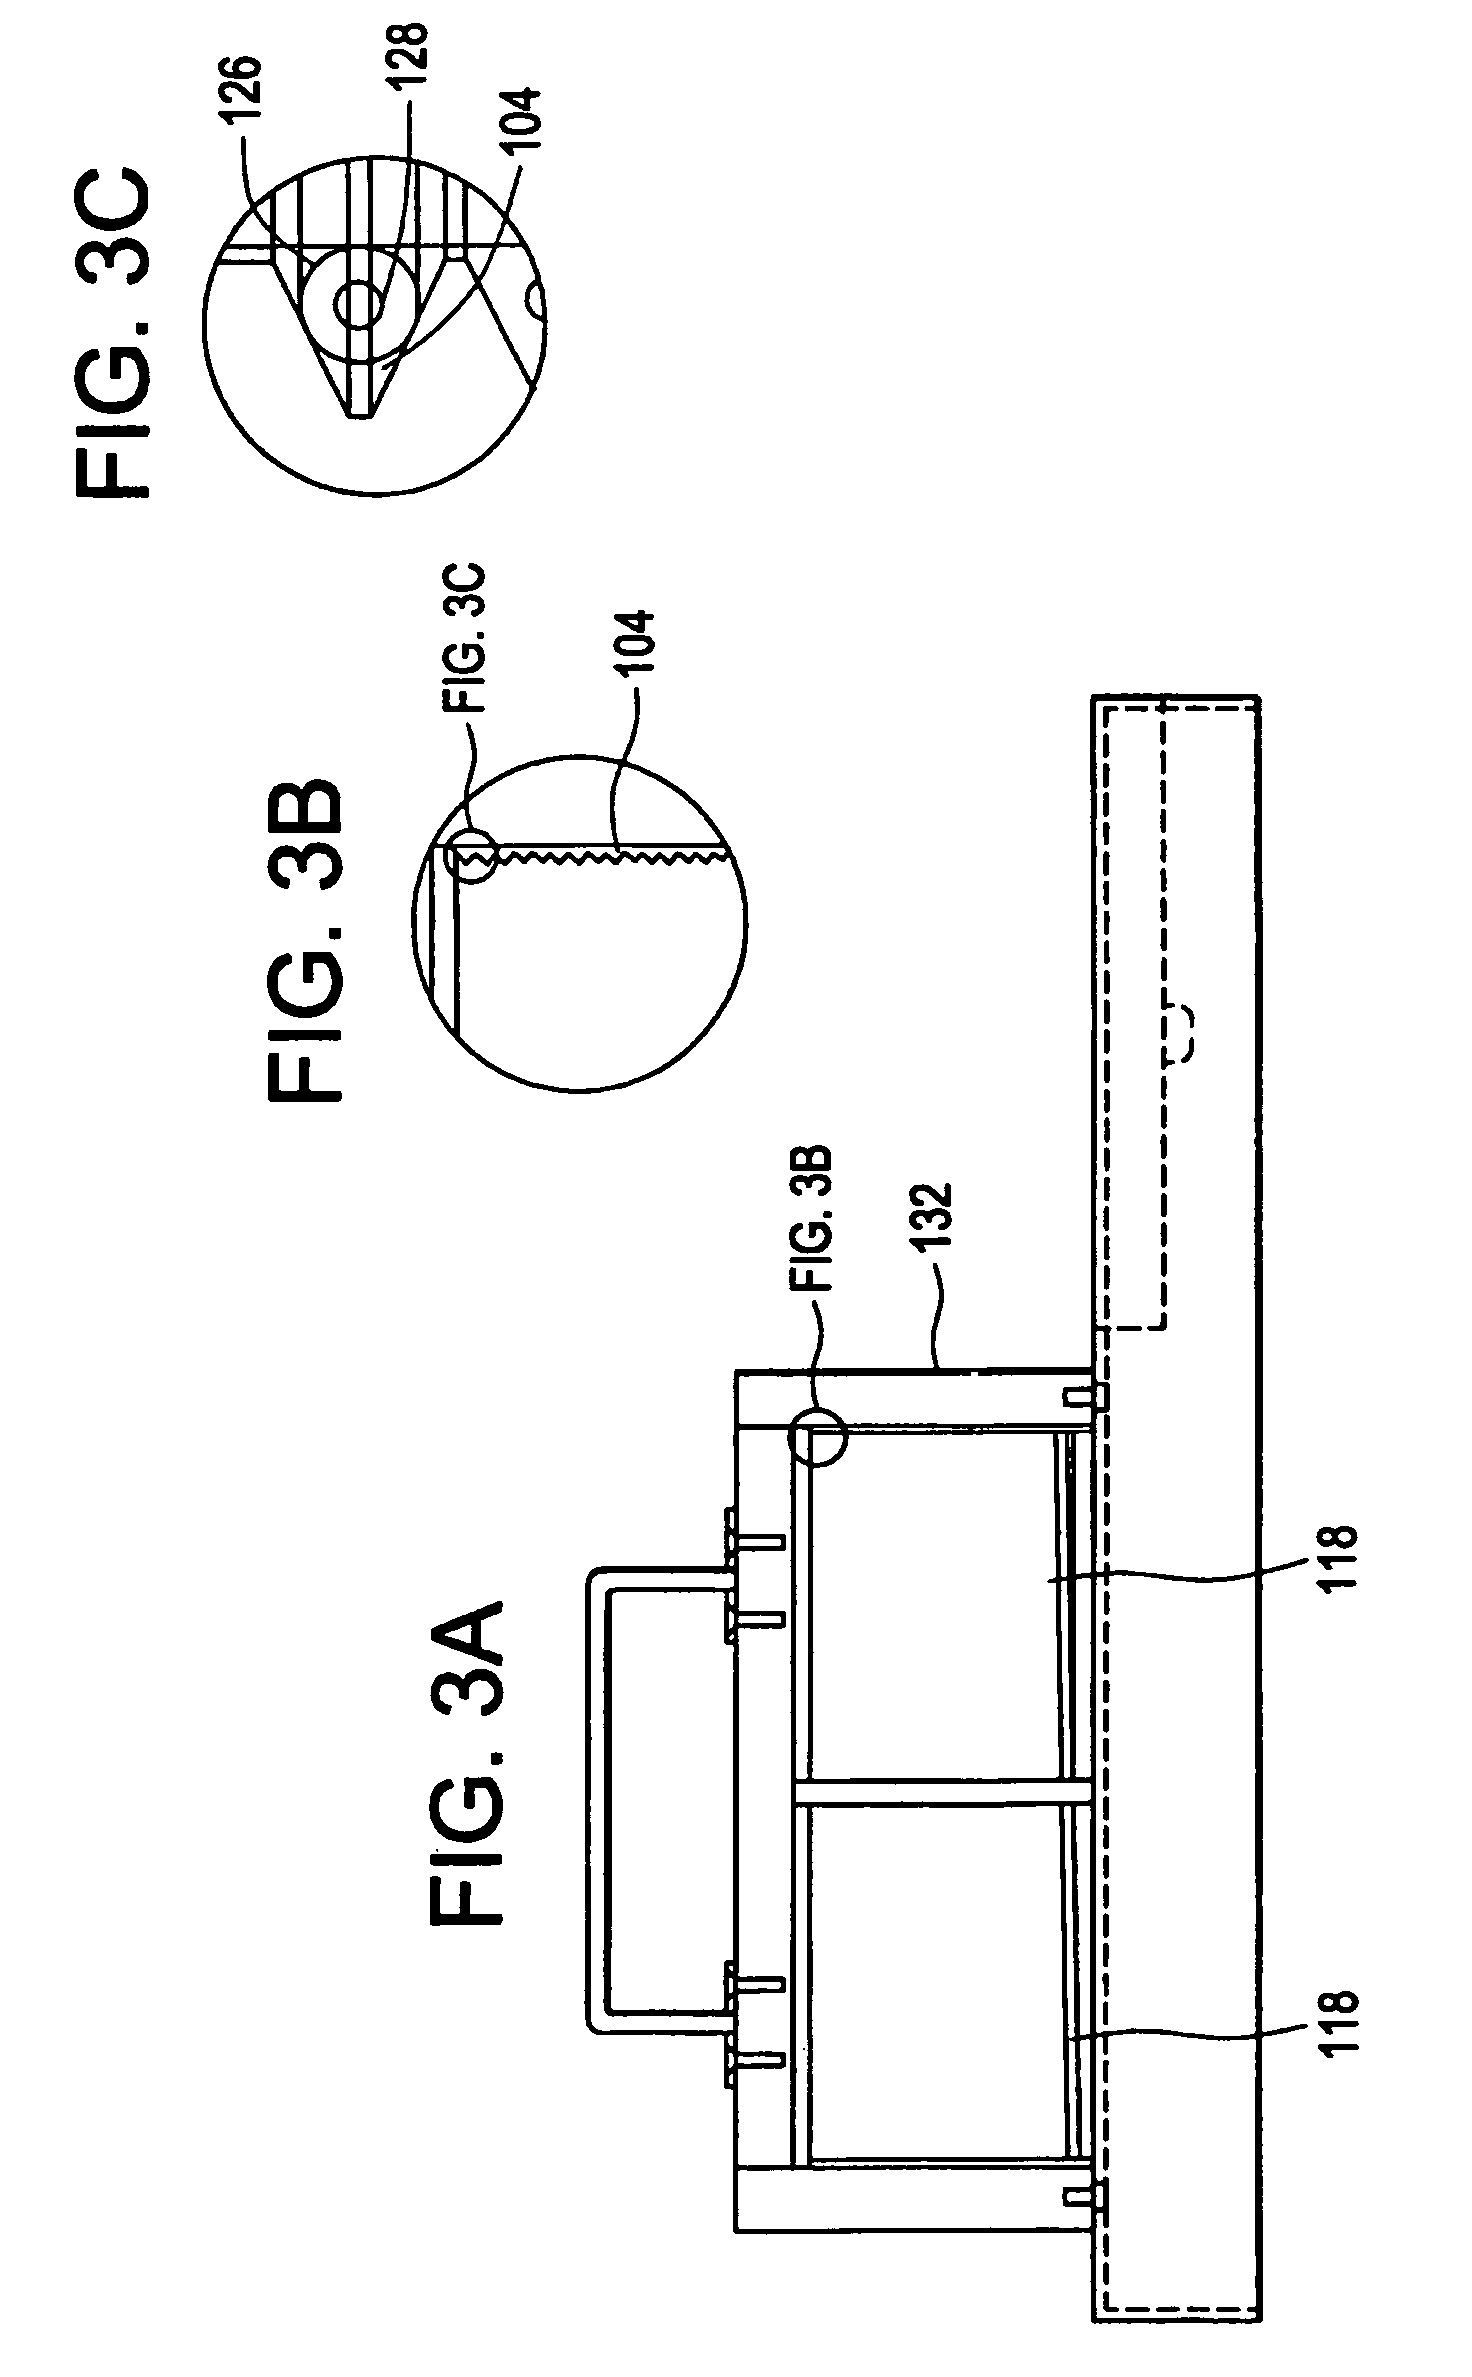 Method for a continuous rapid thermal cycle system